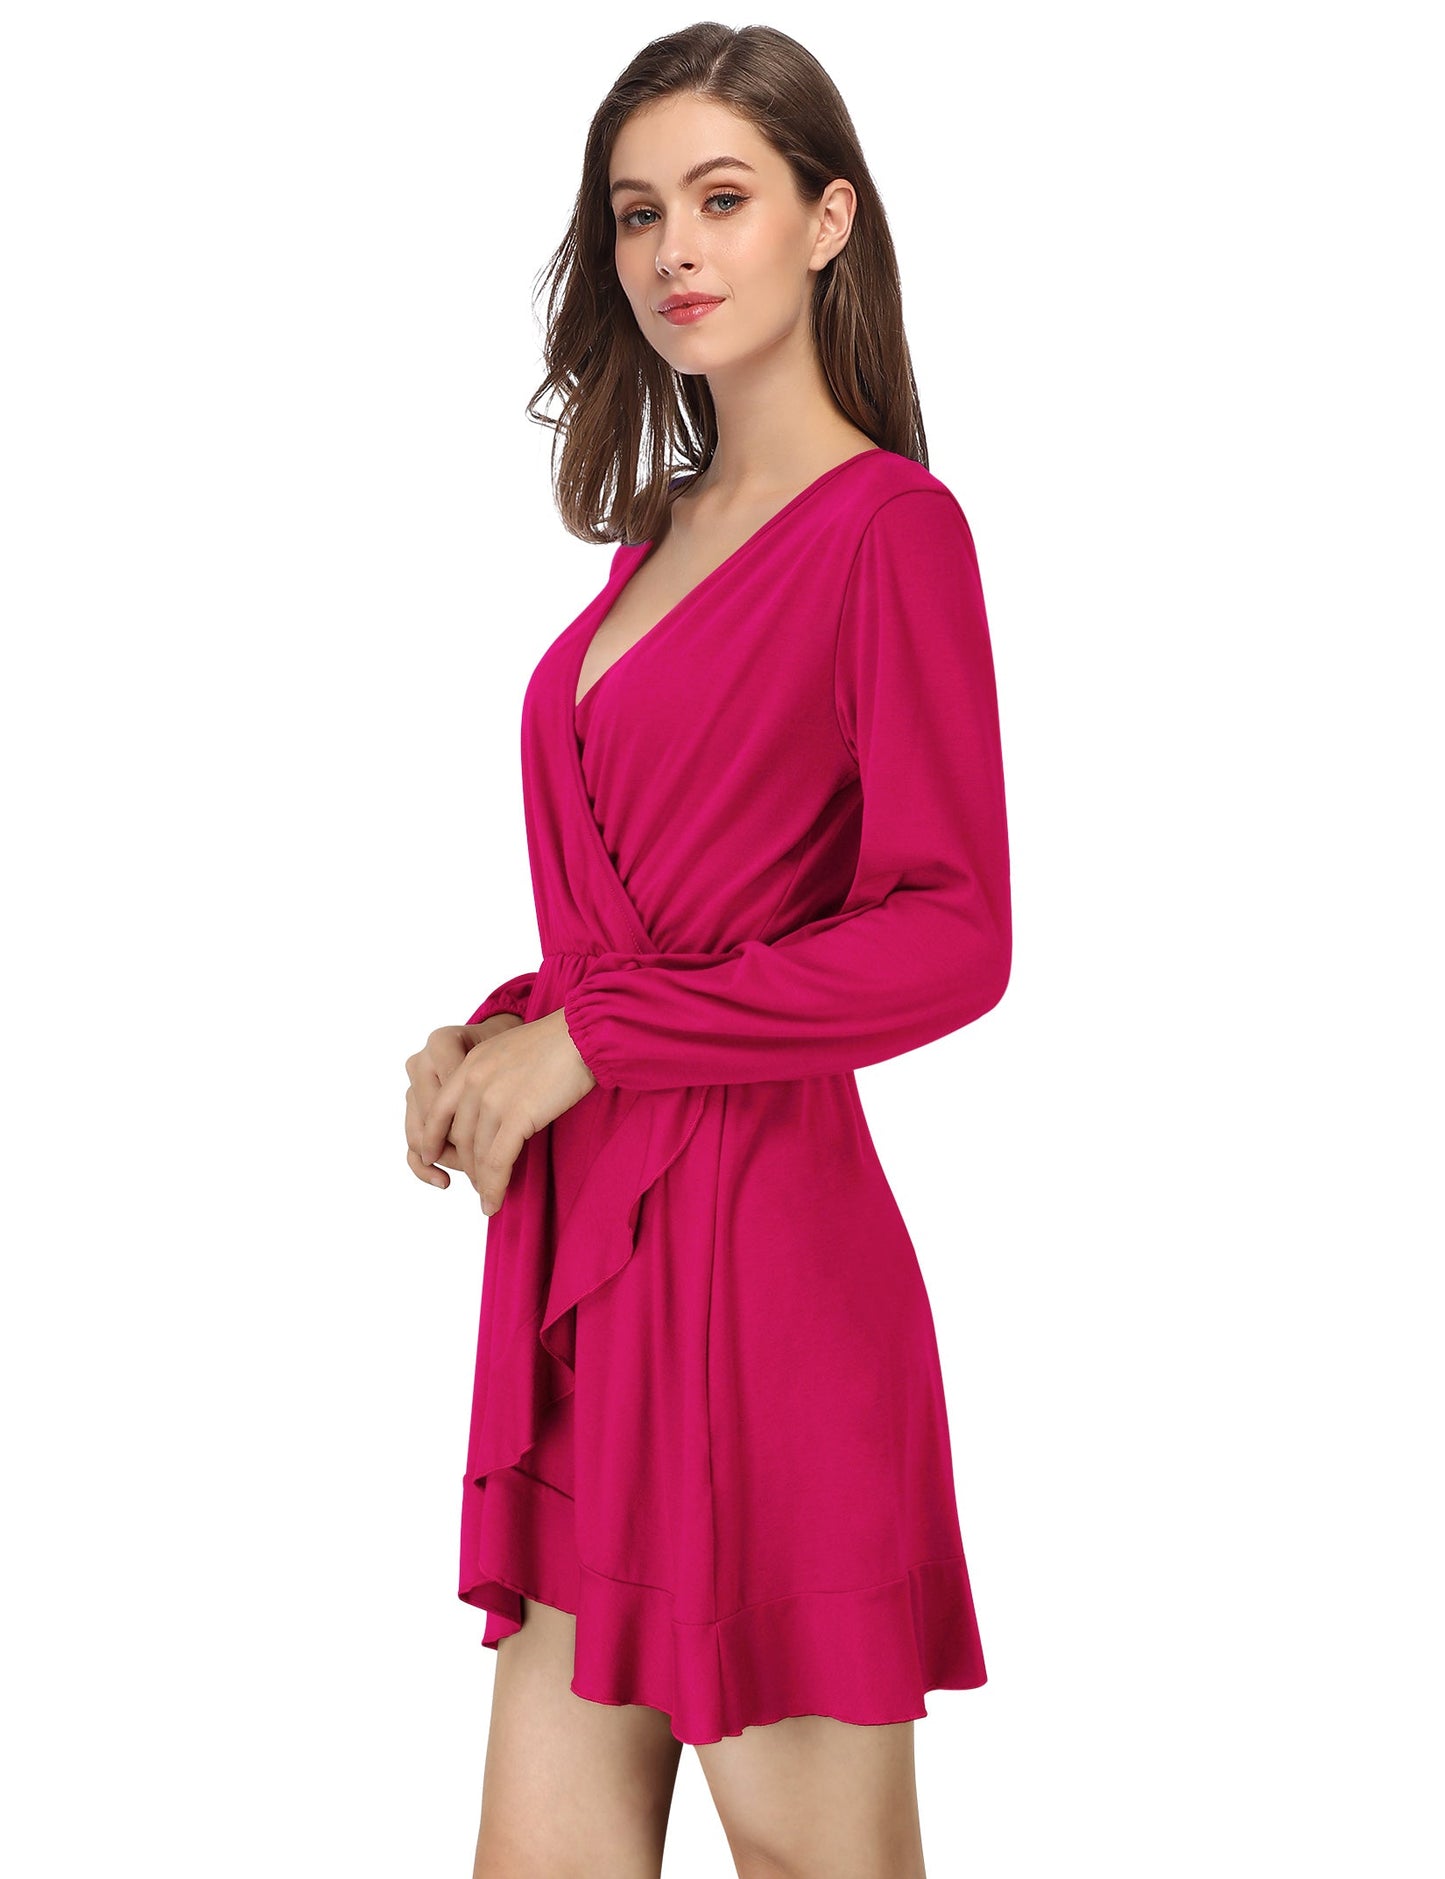 YESFASHION Women's Vneck A-Line Ruffles Cocktail Party Dress Pink